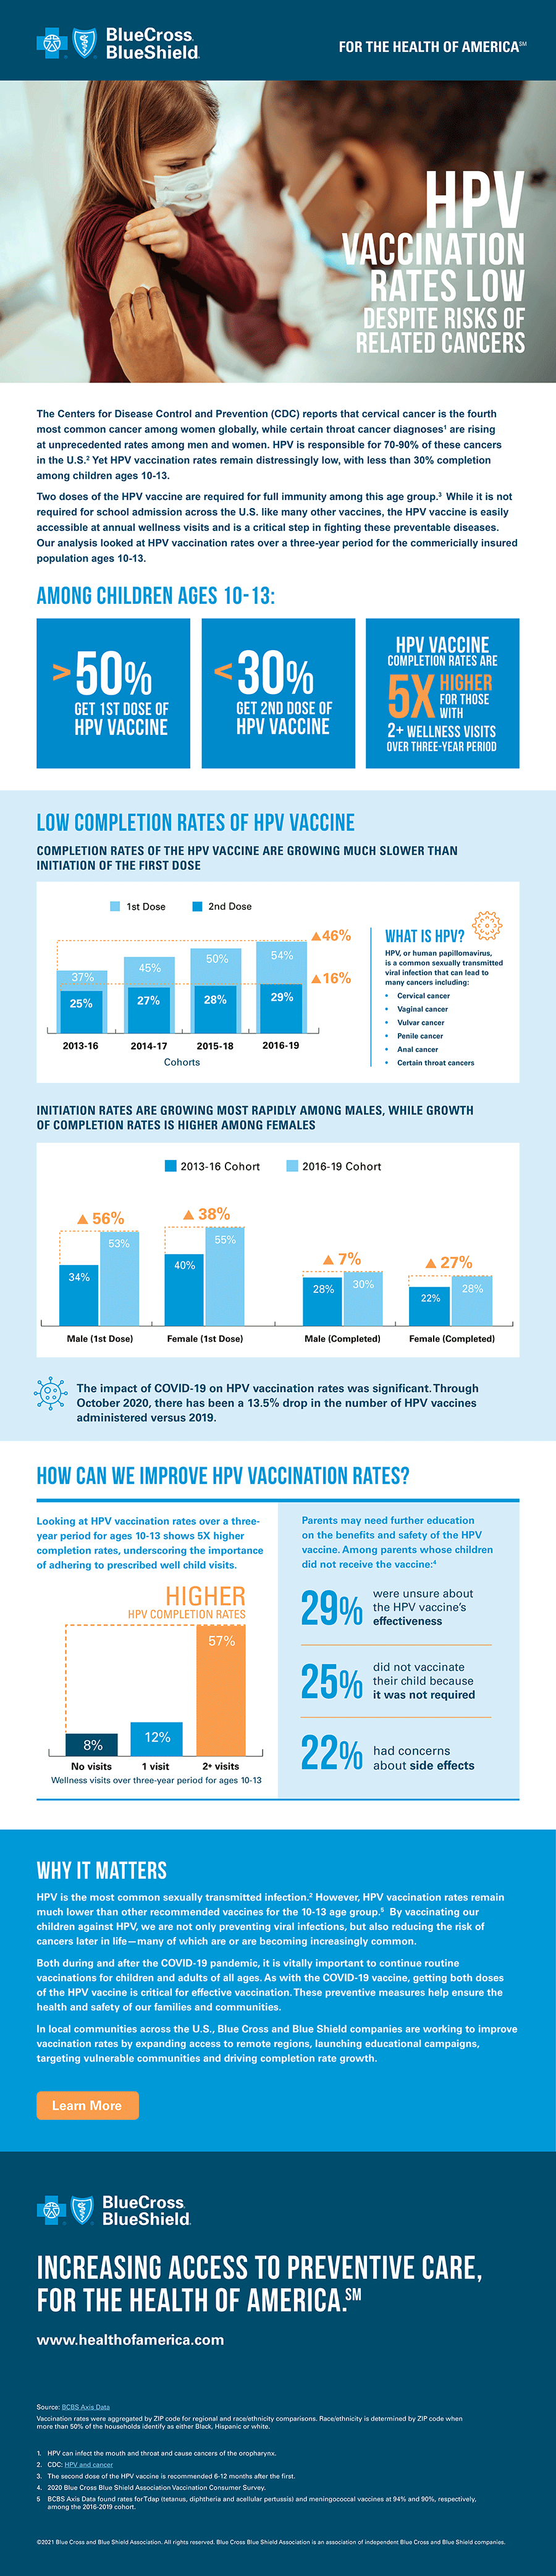 HPV vaccination rates low despite risks of related cancers infographic